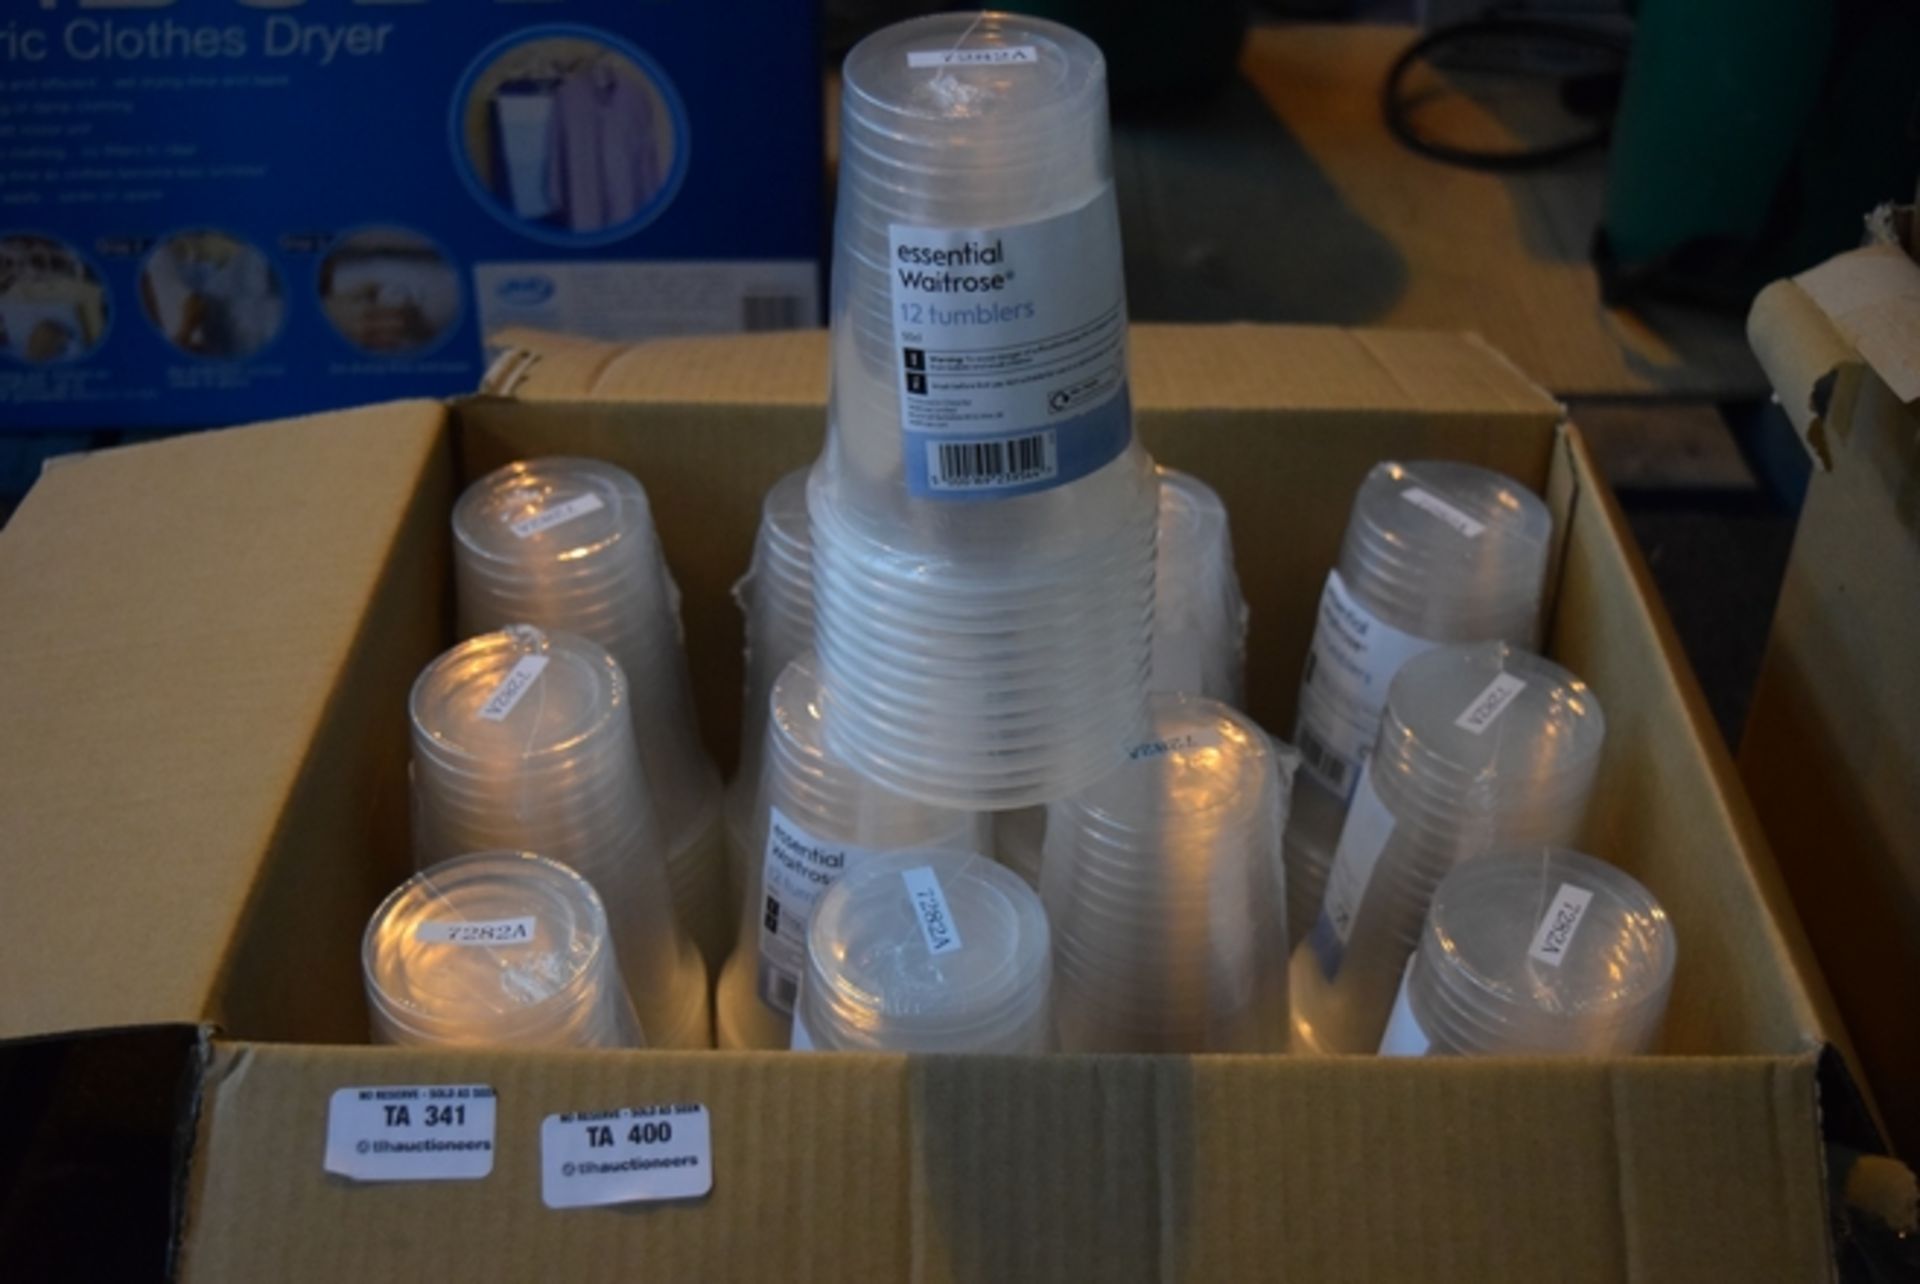 1X BOX CONTAINING 12X BRAND NEW PACKS OF 12 ESSENTIAL WAITROSE TUMBLERS (PERFECT FOR XMAS PARTIES)